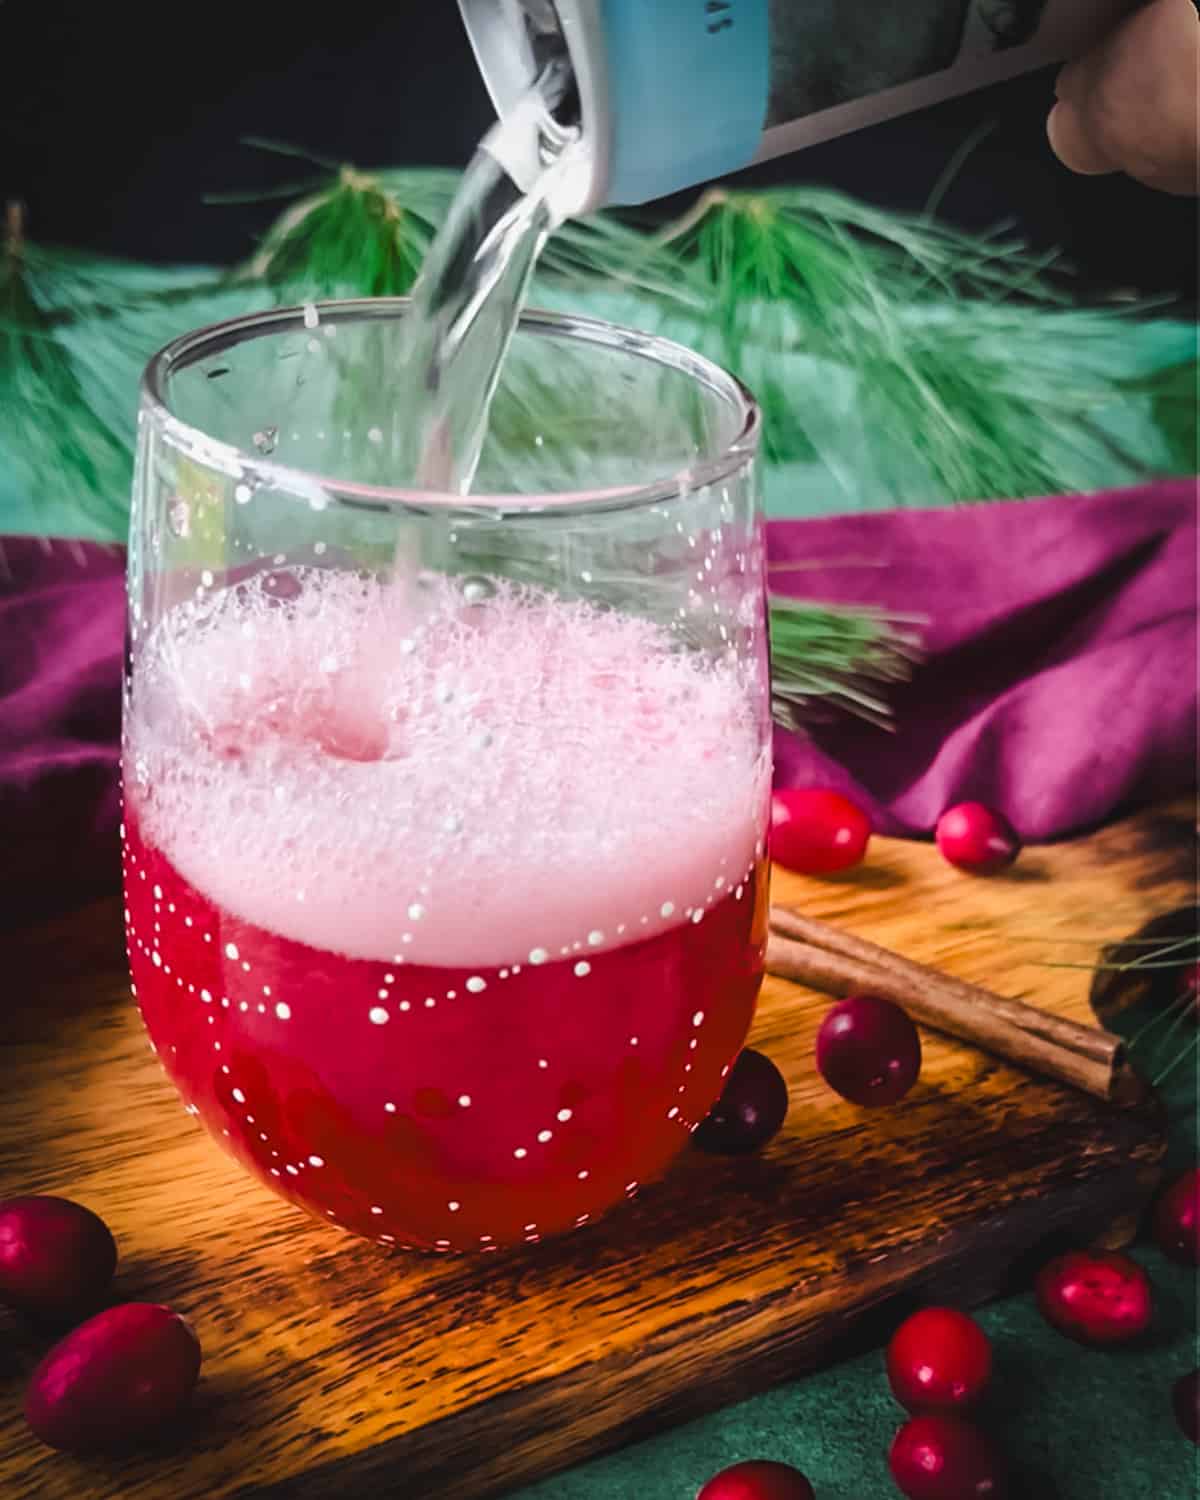 A can of champagne pouring into the wine glass over the cranberry syrup, on a wood surface surrounded by red and green cloths and fresh whole cranberries. 